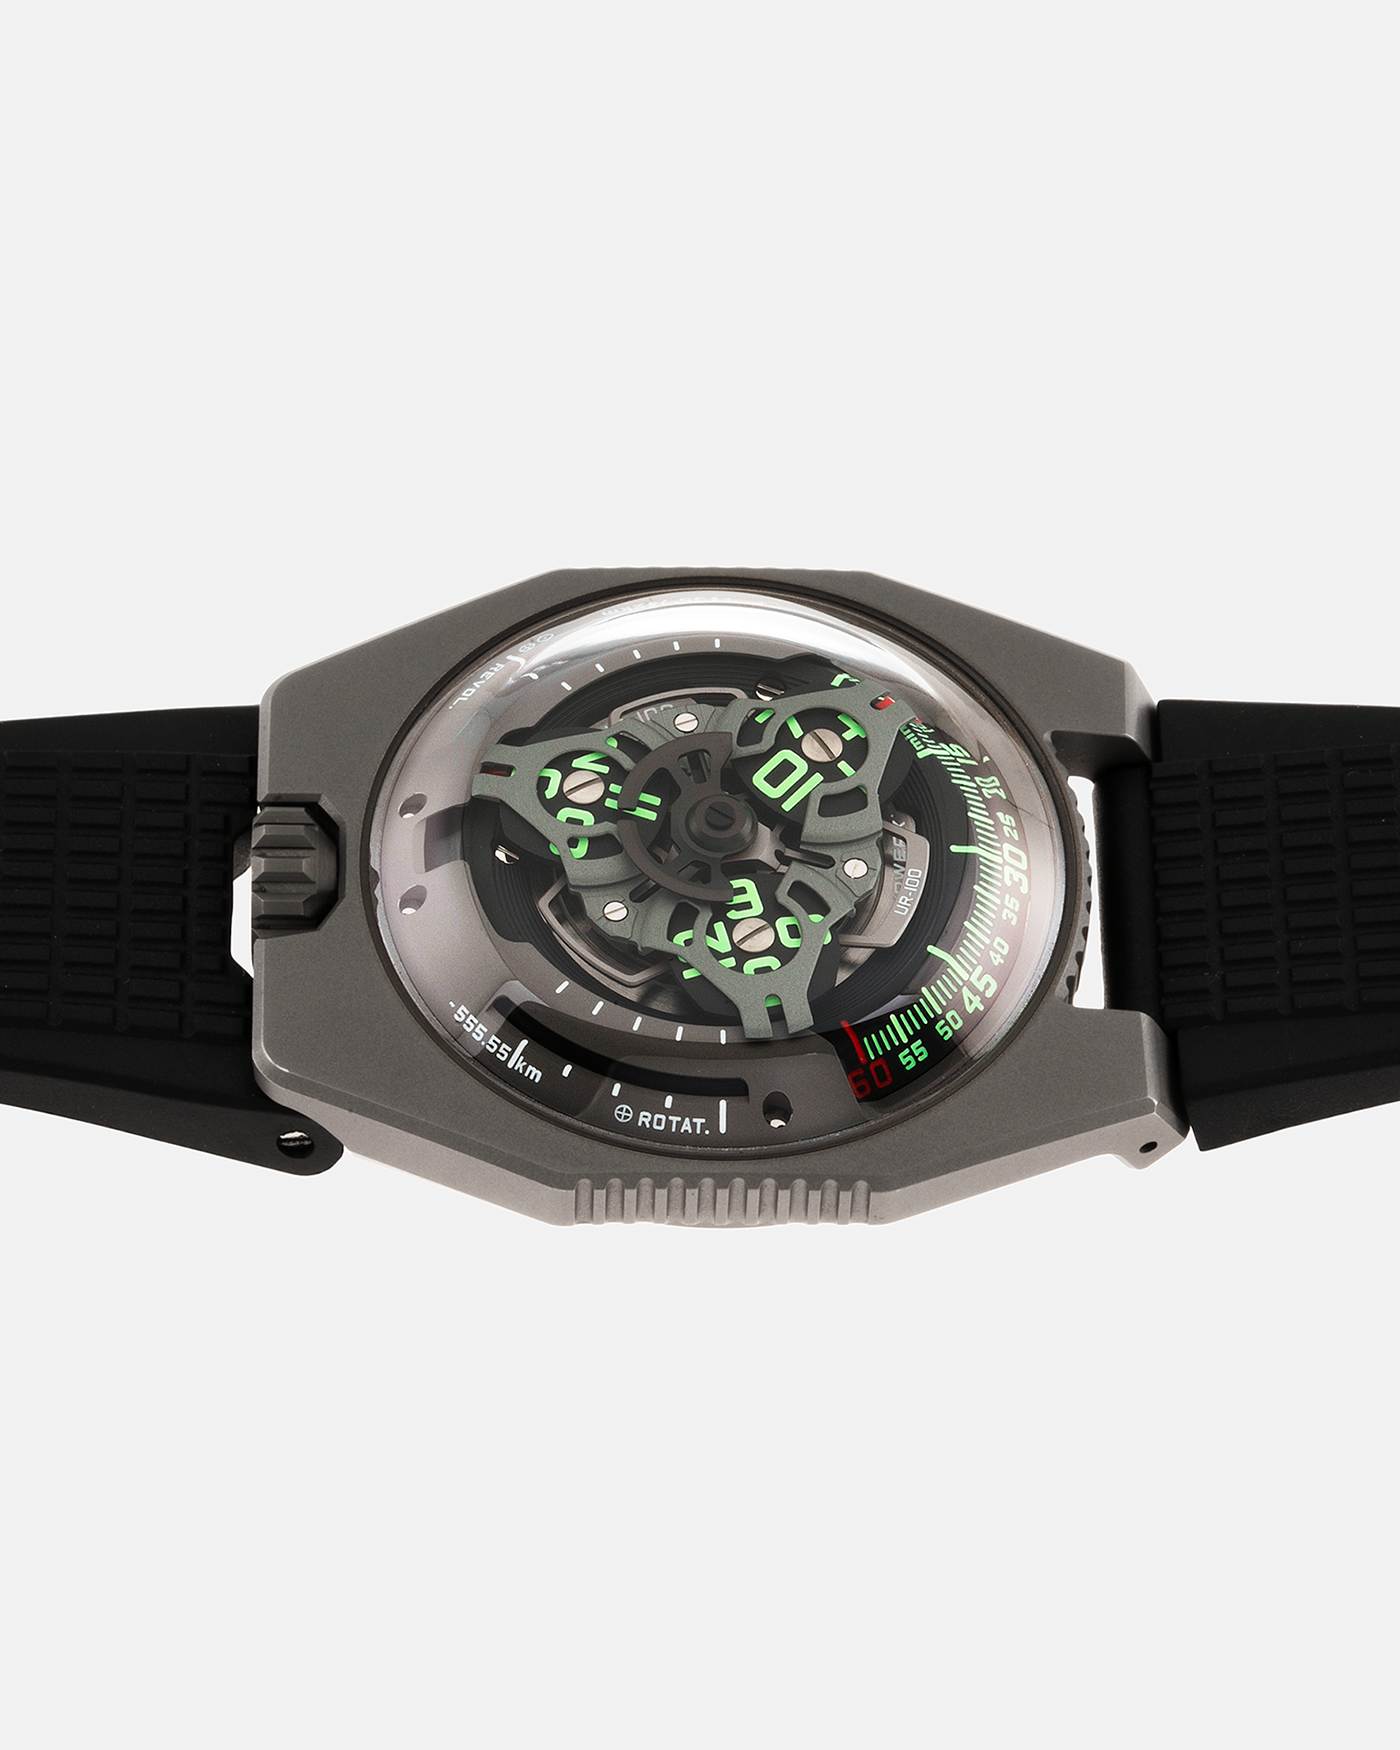 Brand: Urwerk Year: 2020 Model: UR100 GunMetal, Limited Edition of 25 Pieces Material: Titanium and Stainless-Steel Case with GunMetal PVD-Coating, ARCAP Alloy (Blend of Nickle, Copper, Cobalt and Zinc) Movement Carousell System Movement: Urwerk Cal. 12.01, Self-Winding Case Dimensions: 41mm x 14mm Strap: Urwerk Proprietary Black Rubber Strap with Signed Deployant Buckle, with additional Urwerk Proprietary Black Textile Strap